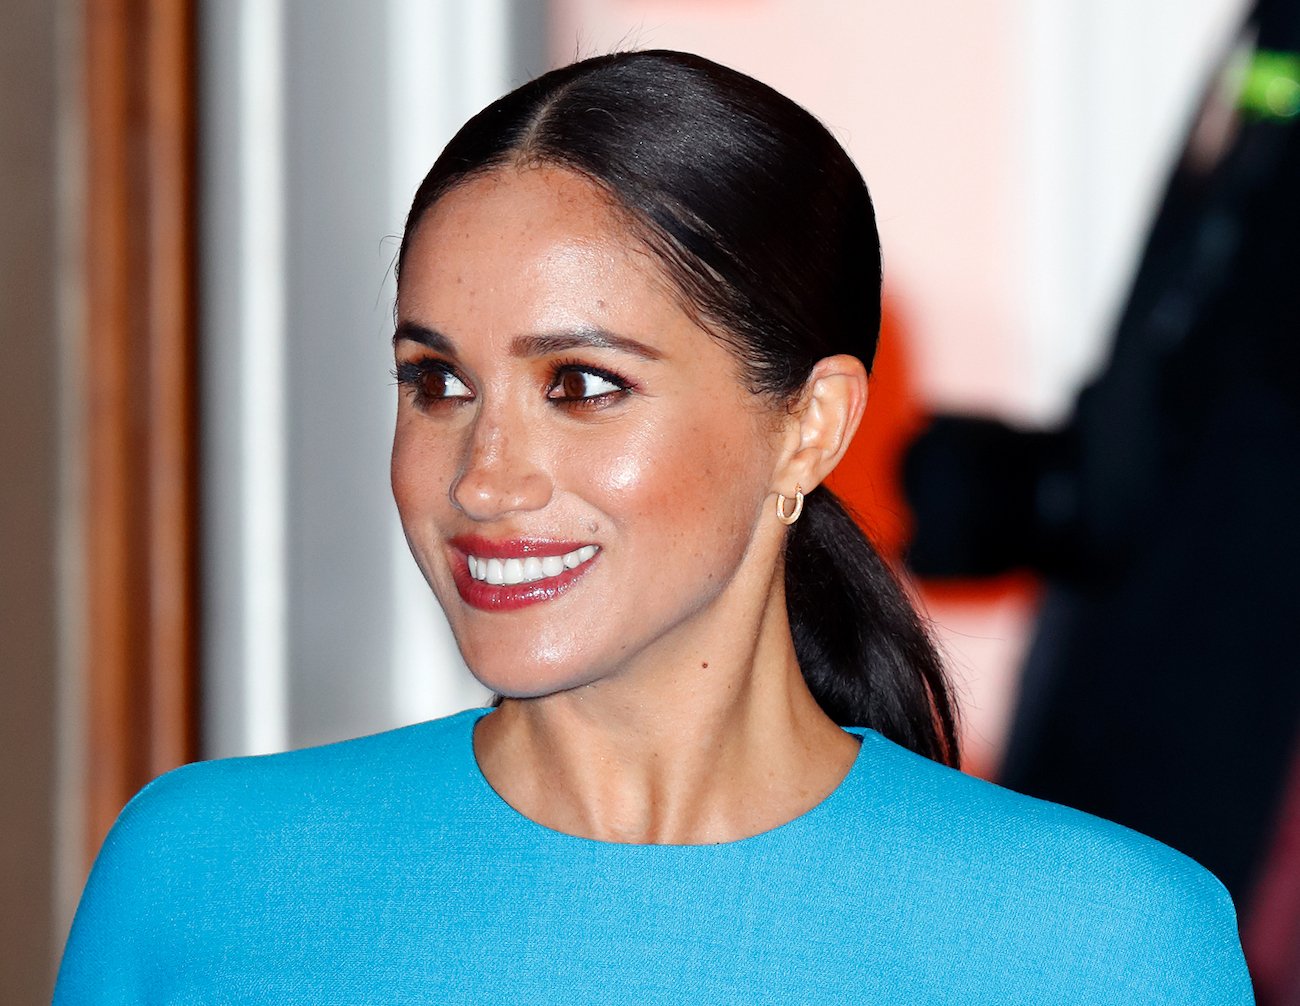 Meghan Markle wearing dark red lipstick and a blue outfit